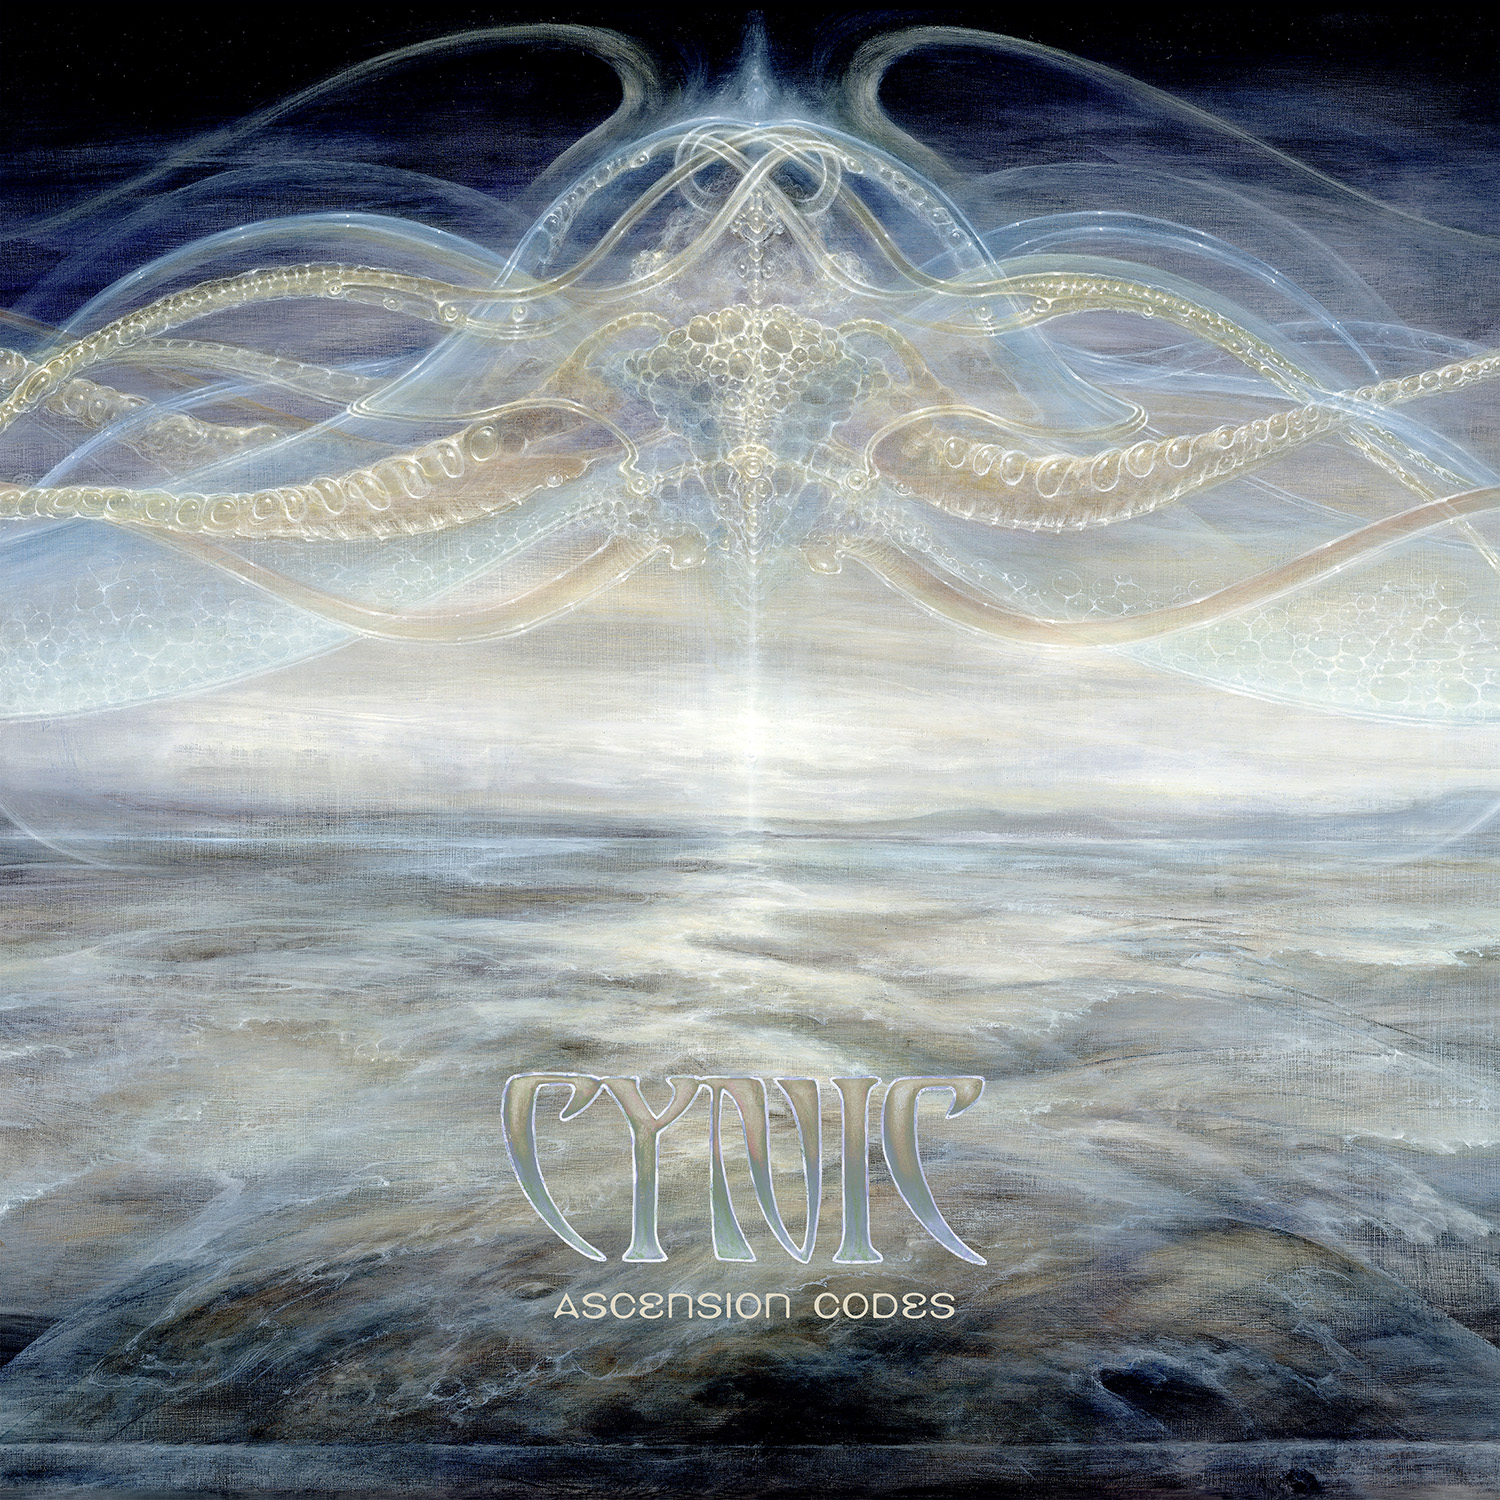 Cynic – Ascension Codes Review